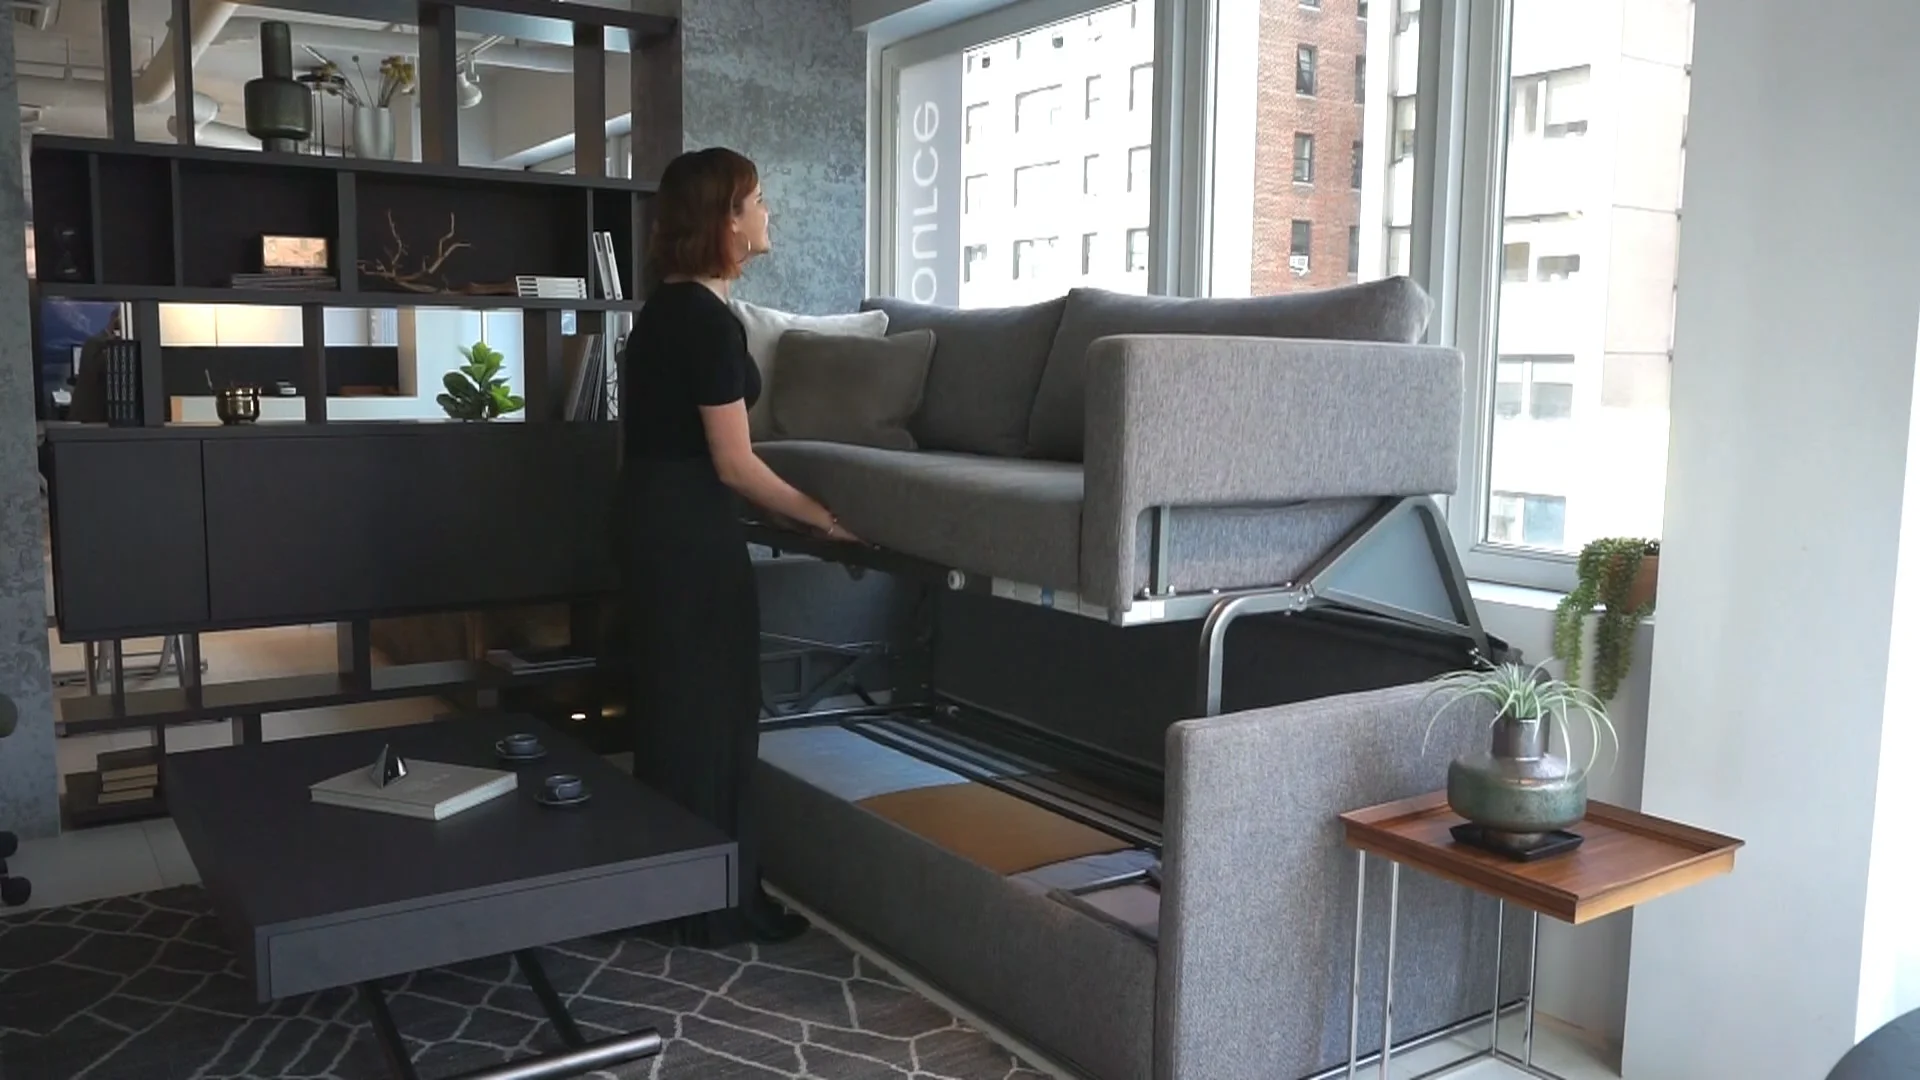 Gemini Bunk Bed Couch Demo On Vimeo